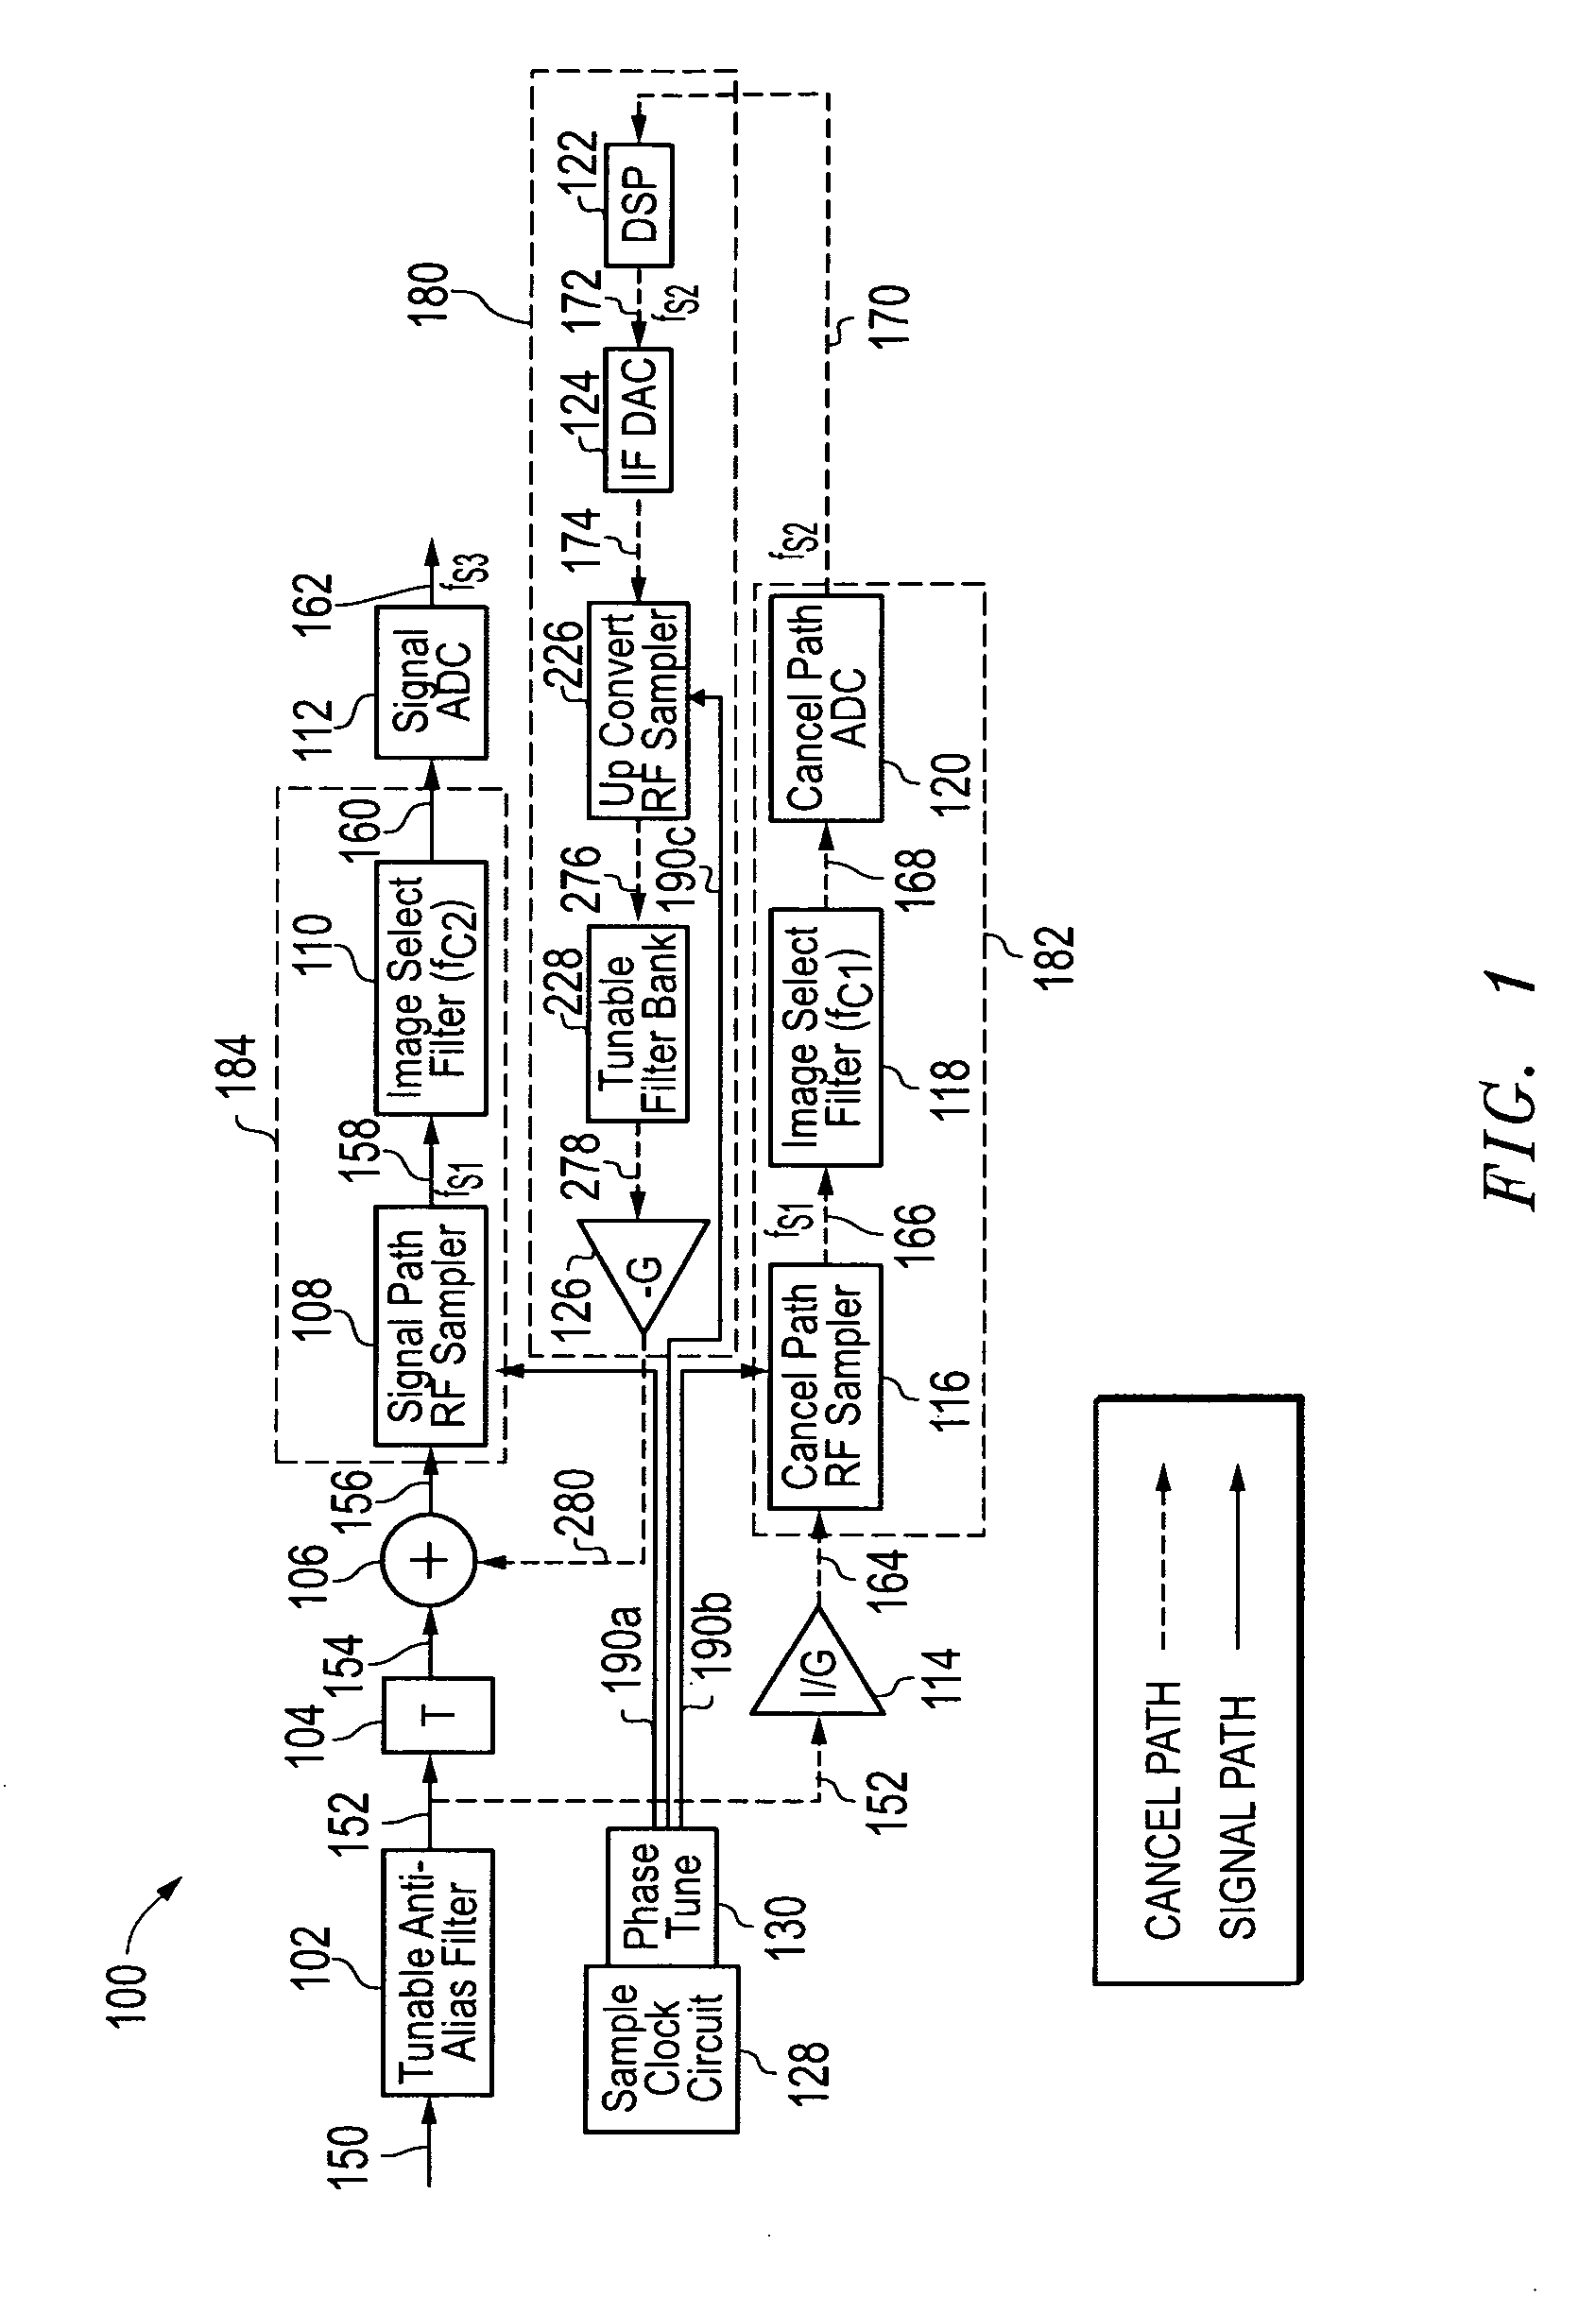 Interference cancellation for reconfigurable direct RF bandpass sampling interference cancellation